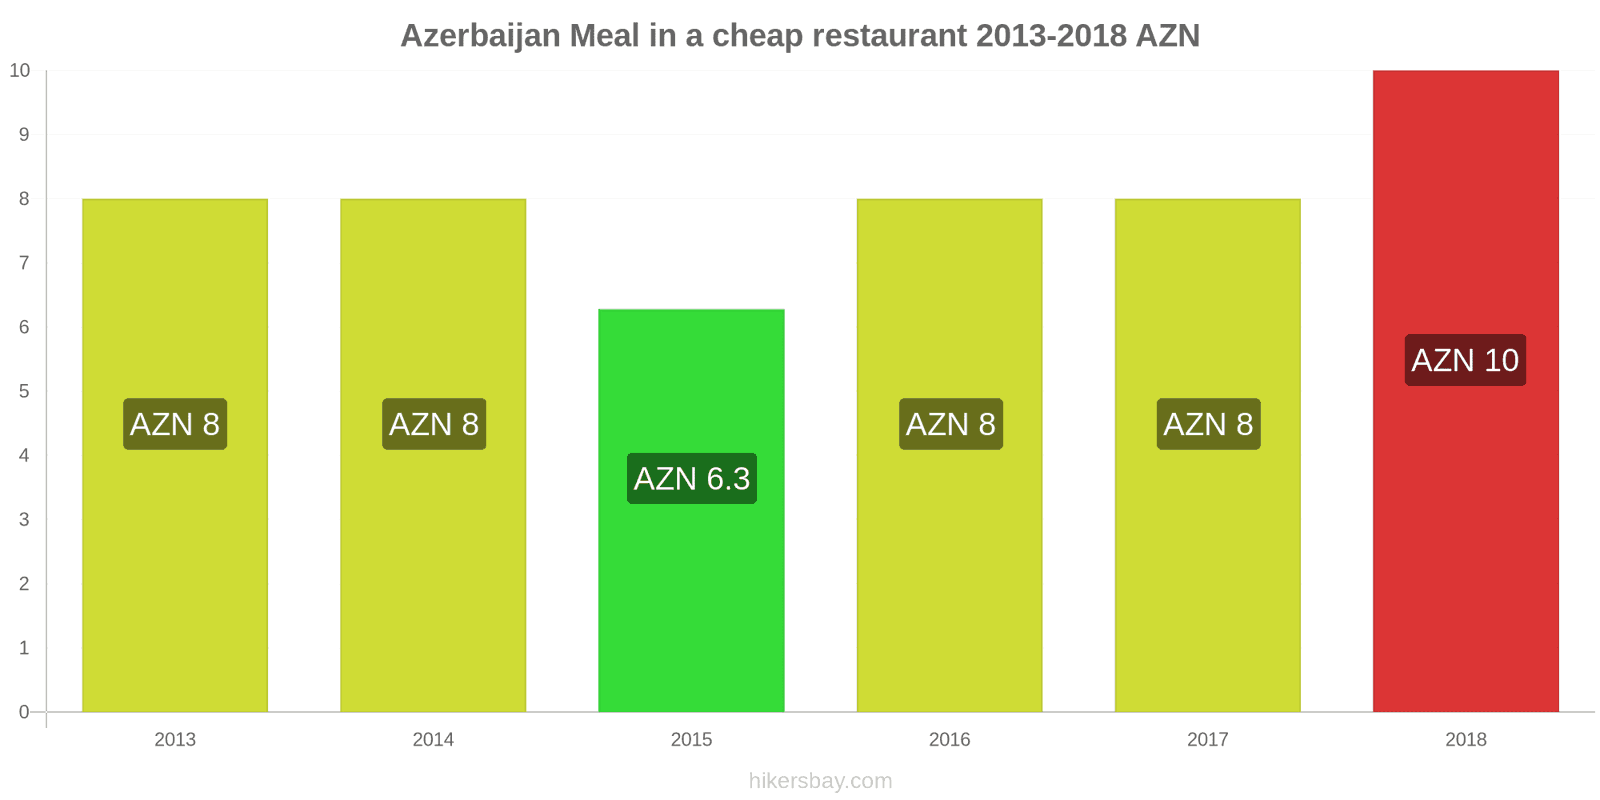 Azerbaijan price changes Meal in a cheap restaurant hikersbay.com